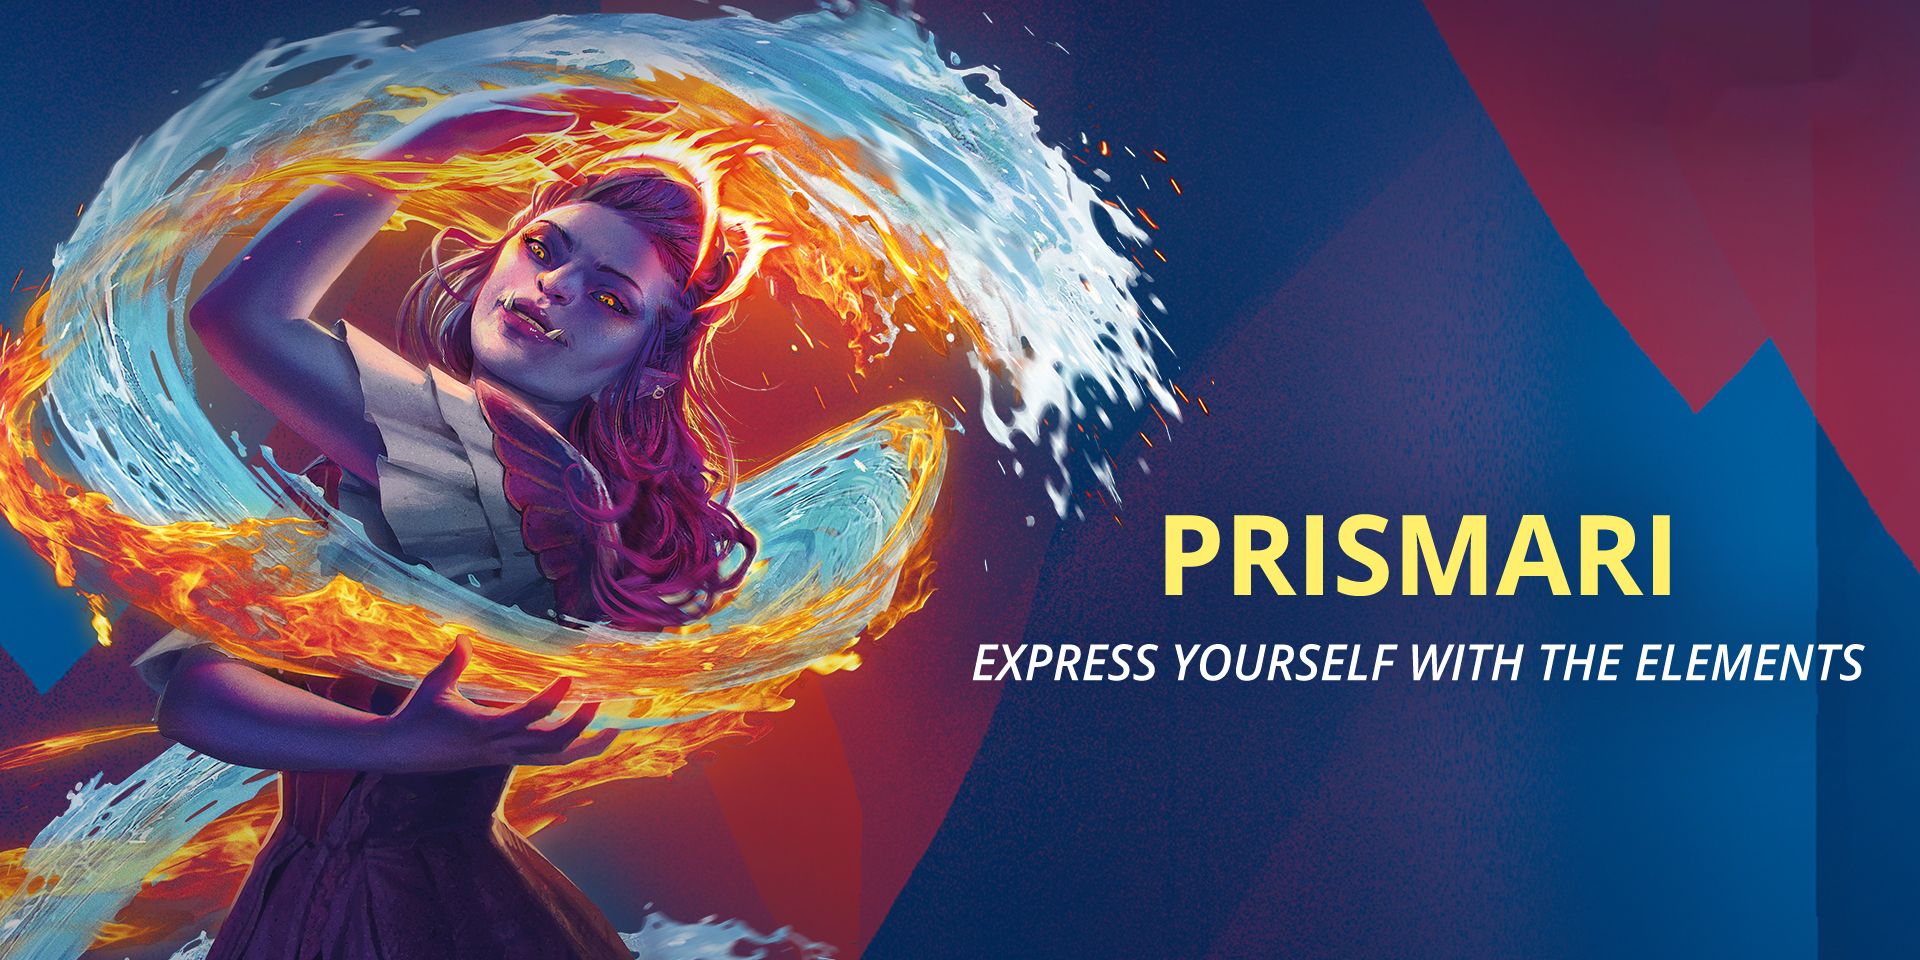 An Azra elementalist wielding twin coils of fire and water, along with text saying &quot;PRISMARI - express yourself with the elements.&quot;